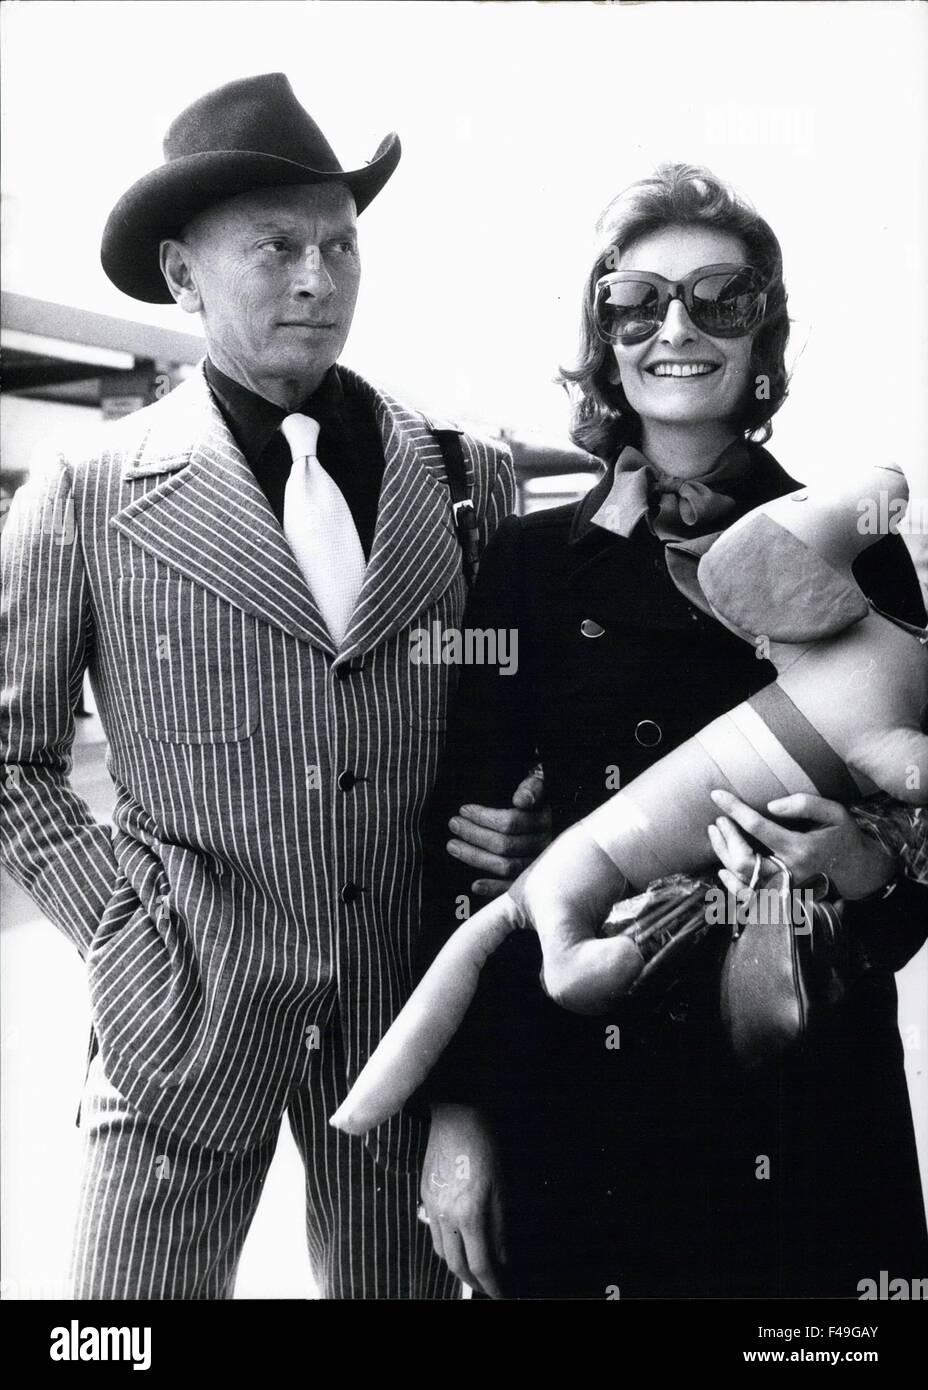 American actor Yul Brynner in West Germany Yul Brynner and his wife Jaqueline came to Munich for the premiere of his newest film Catlow . Immediately after their arrival at the airport they received an Olympia Dachshund. 24th Mar, 1972. The film, which was made in 8 weeks, with the actors working 12 hours a day in Almaria (South Spain) is the first film of the well-known American actor together with the Israeli actress Daliah Lavi. Yul Brynner is very fond of pigeons. He even brought two of the birds to Munich. Keystone photo 24.3.1972 © Keystone Pictures USA/ZUMAPRESS.com/Alamy Live News Stock Photo